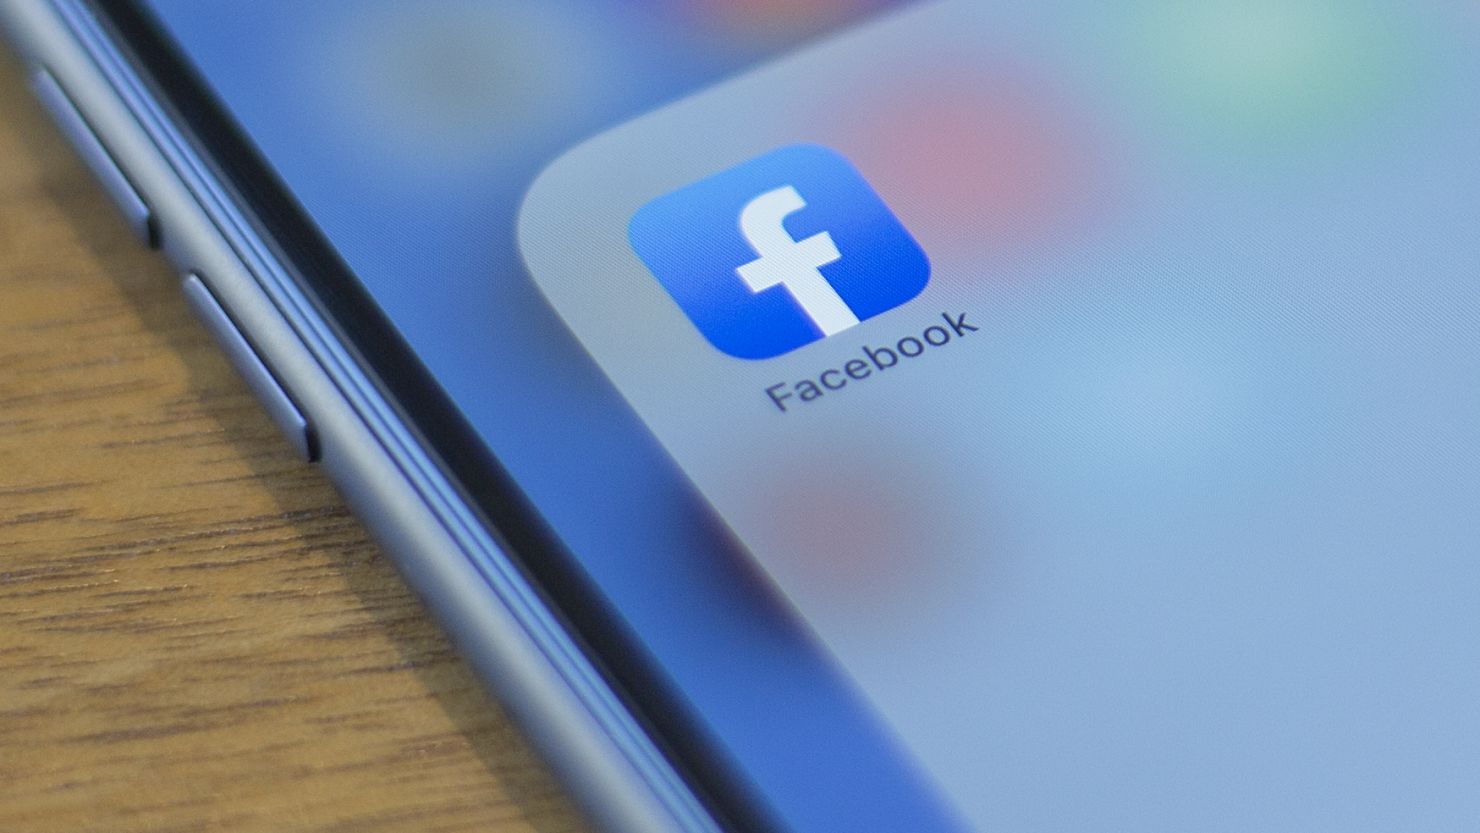 Facebook said the Russia-linked operation started with the creation of batches of fake accounts in 2020.